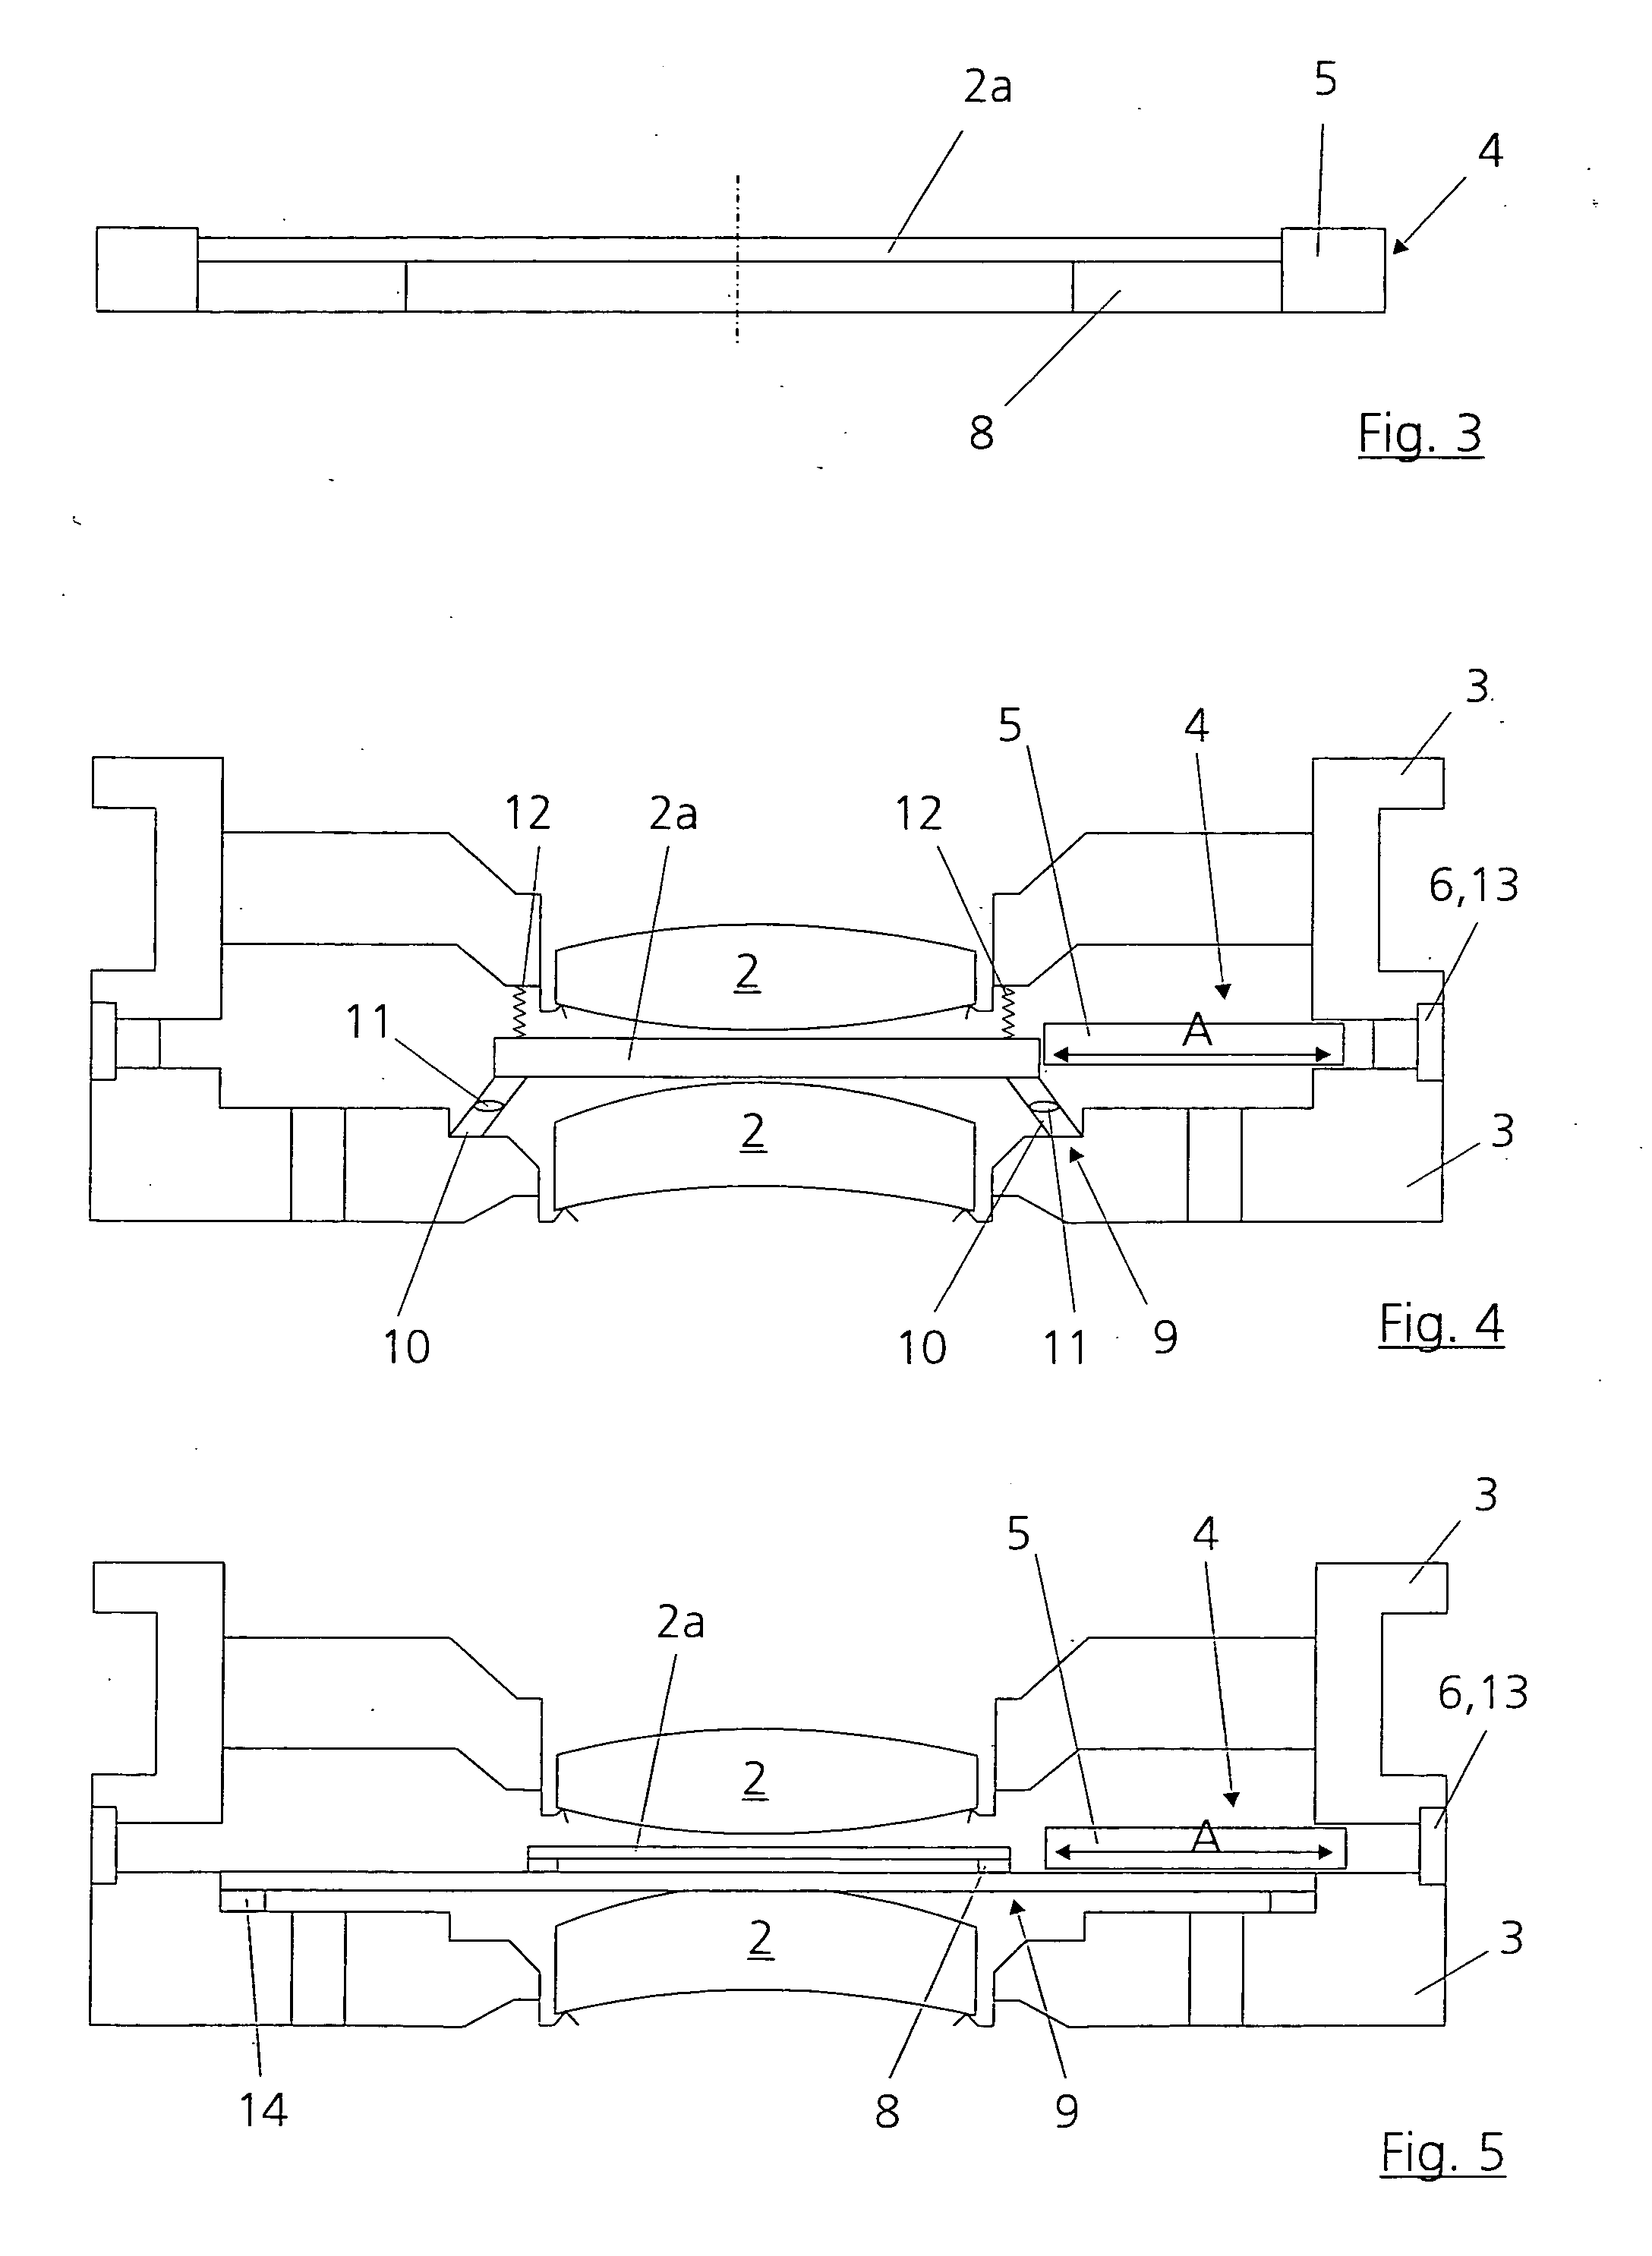 Replacement apparatus for an optical element